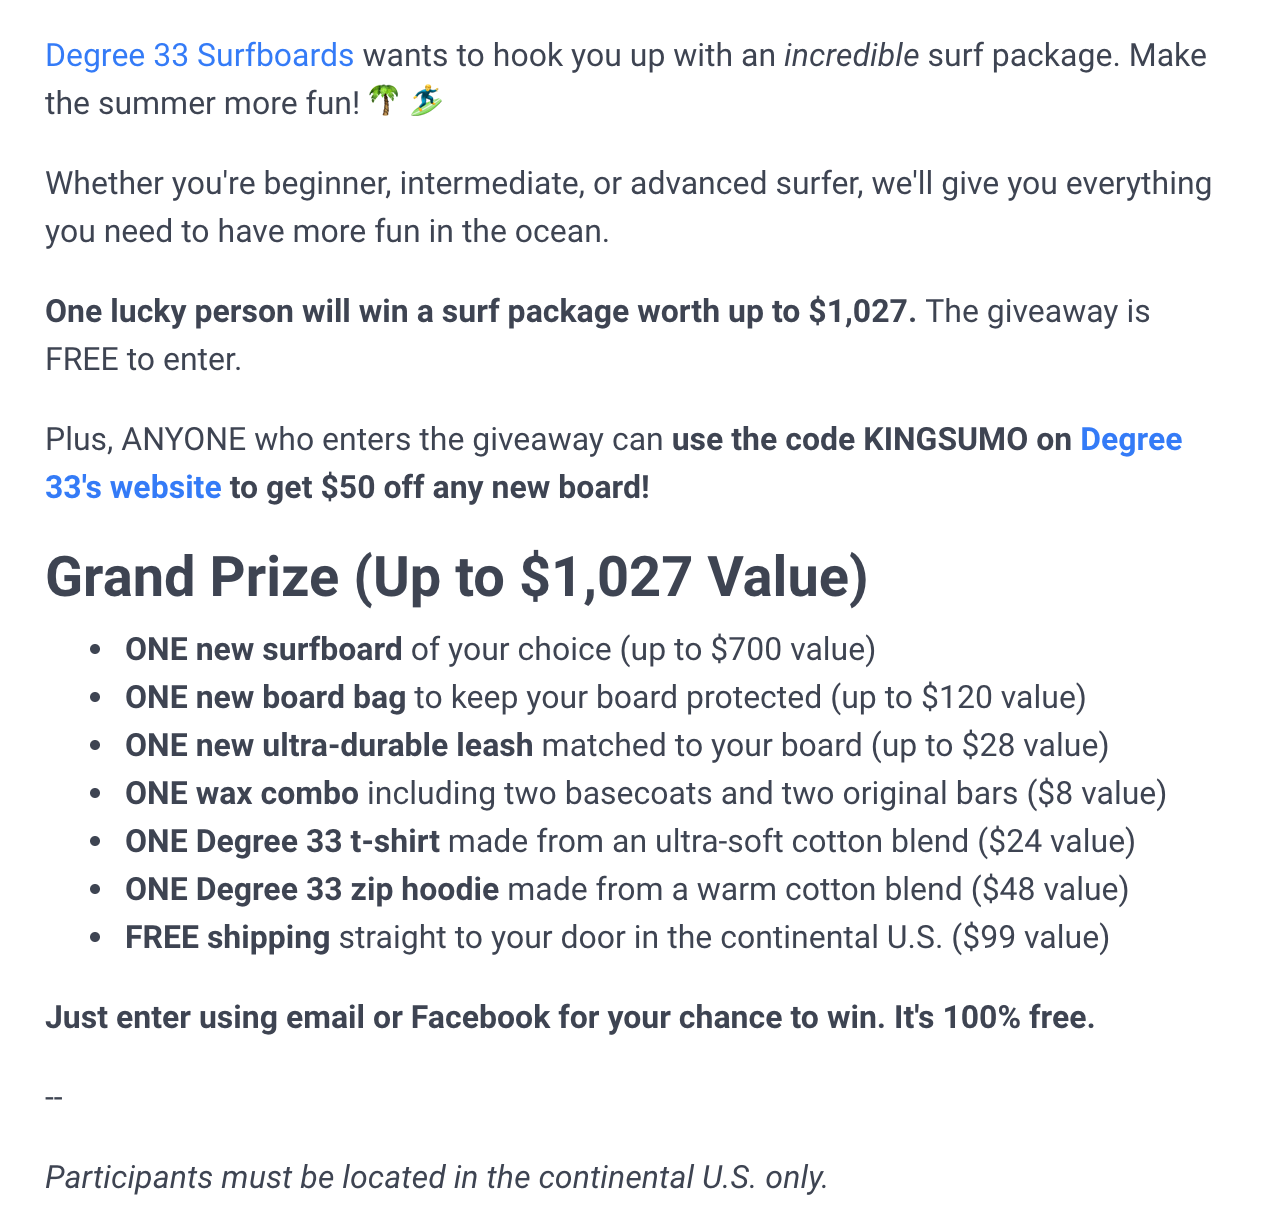 Screenshot showing copy for a sweepstakes